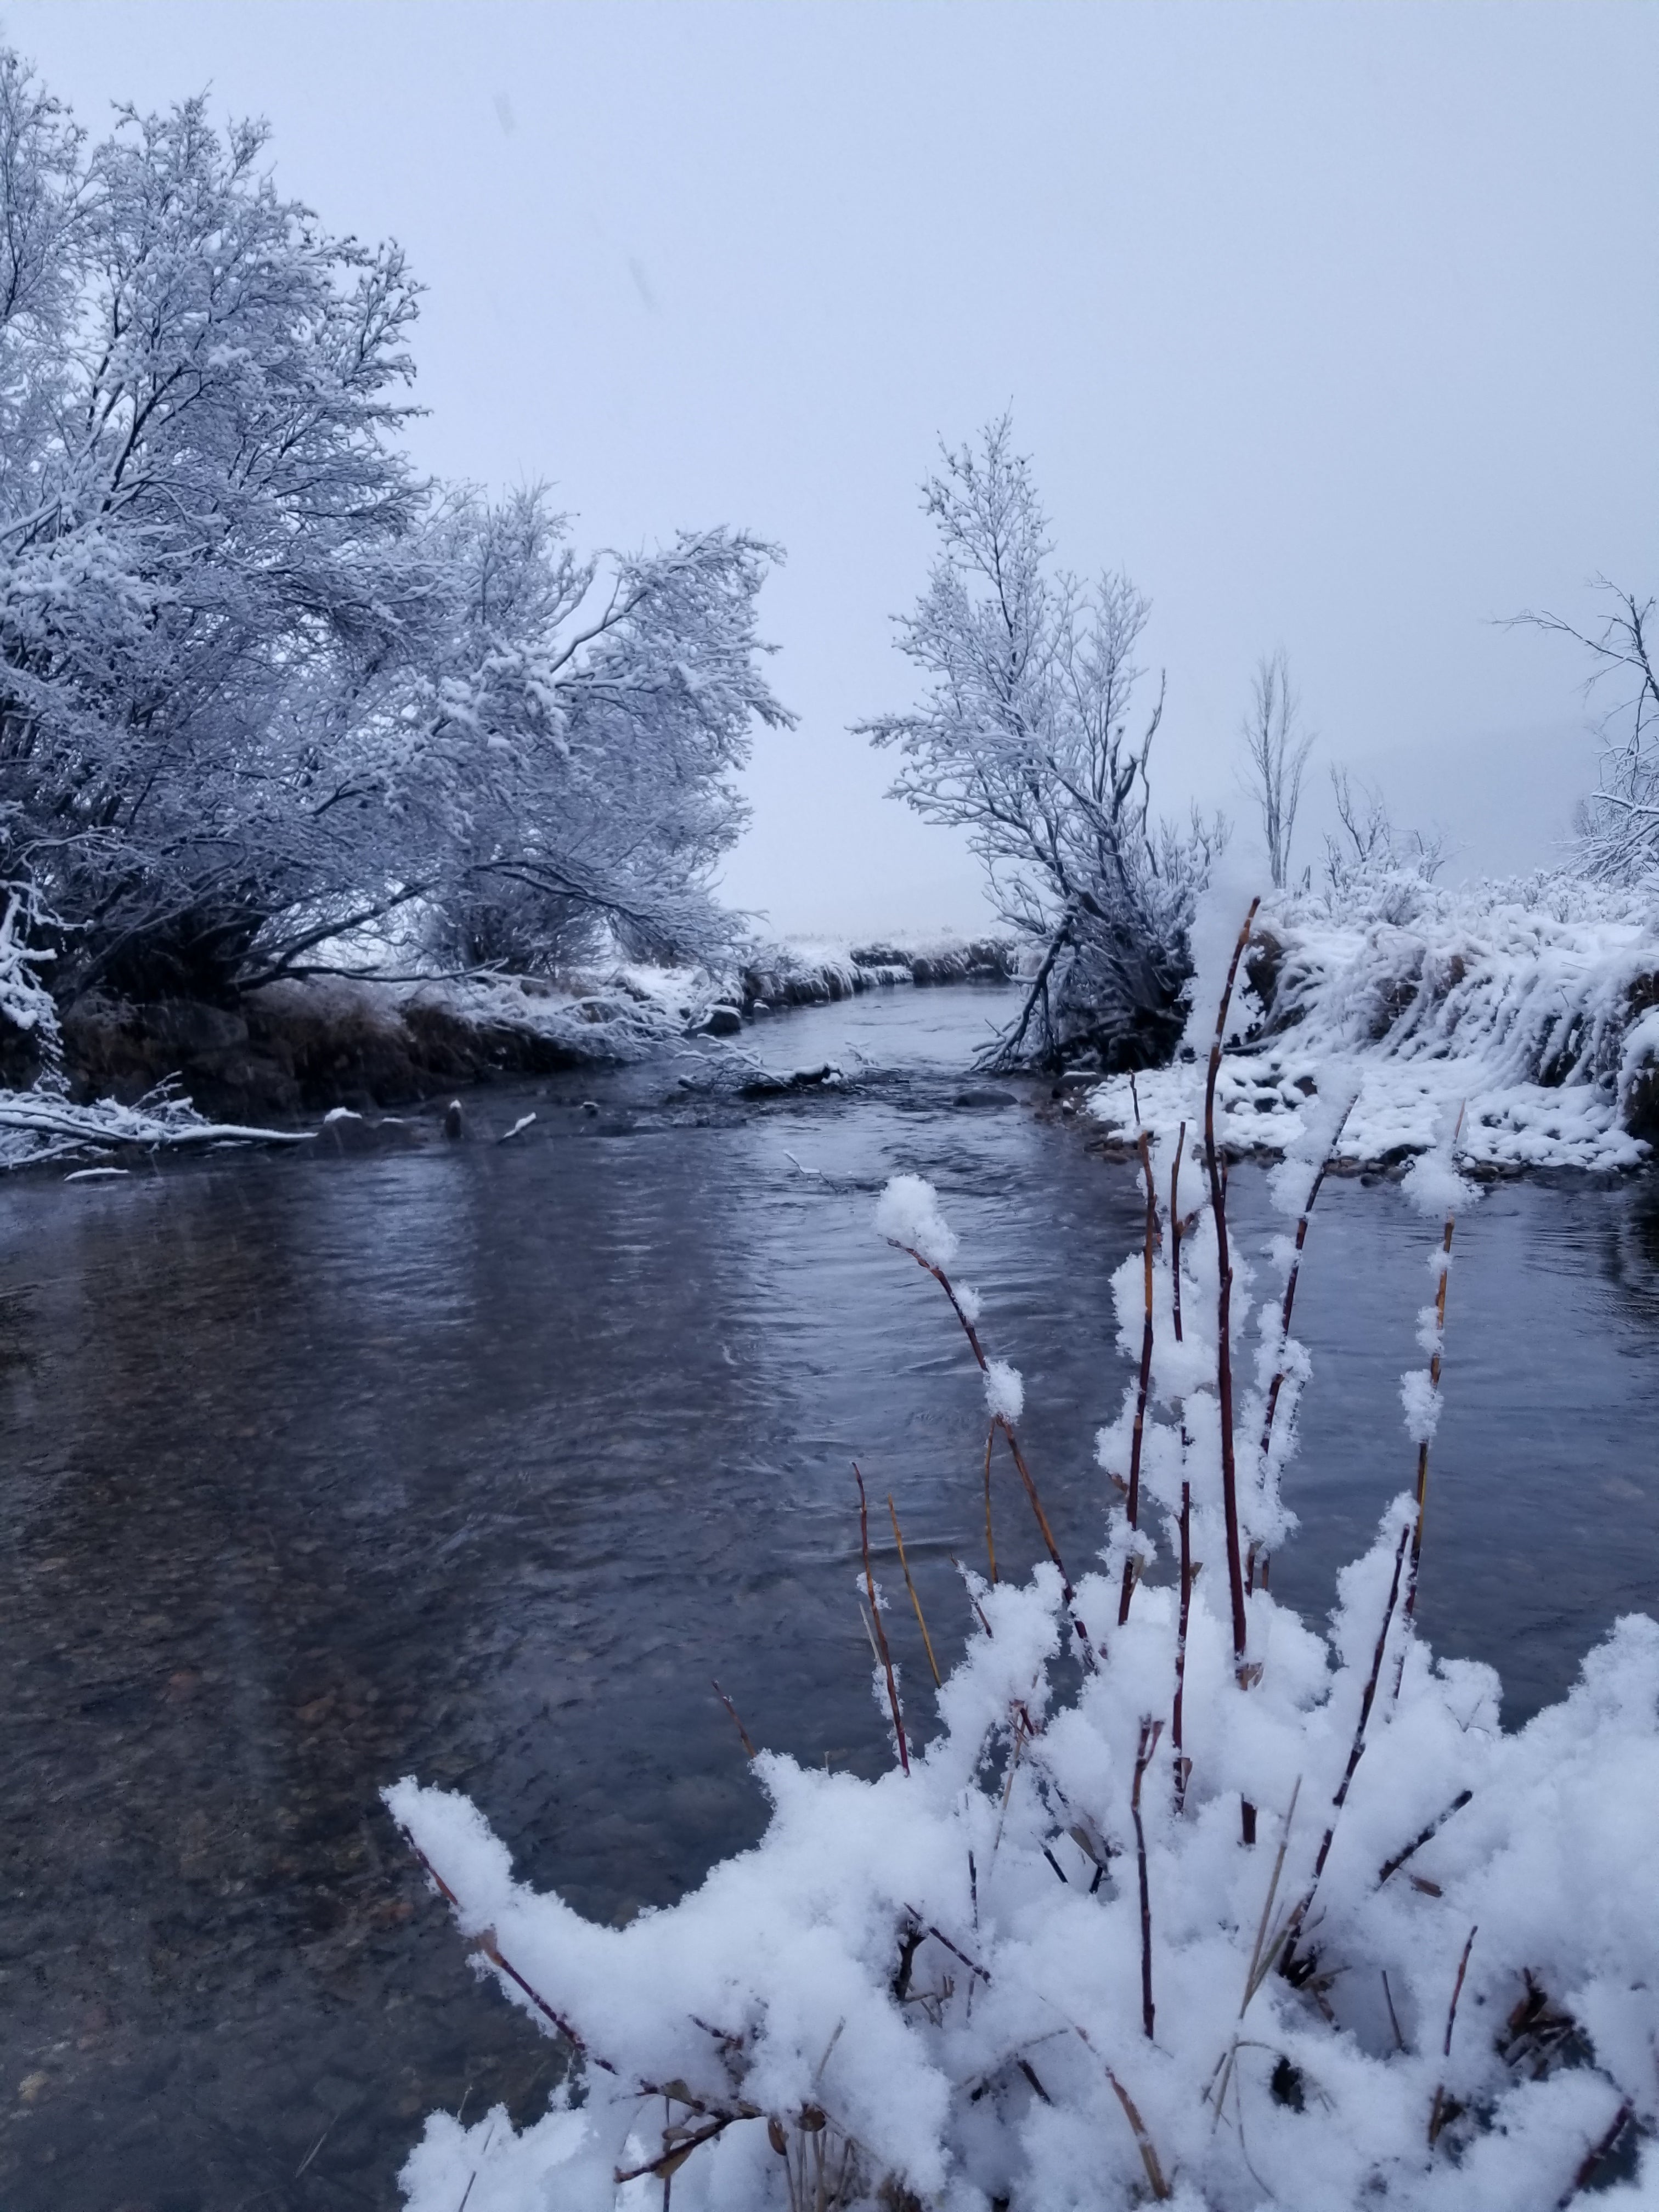 Snow along the river